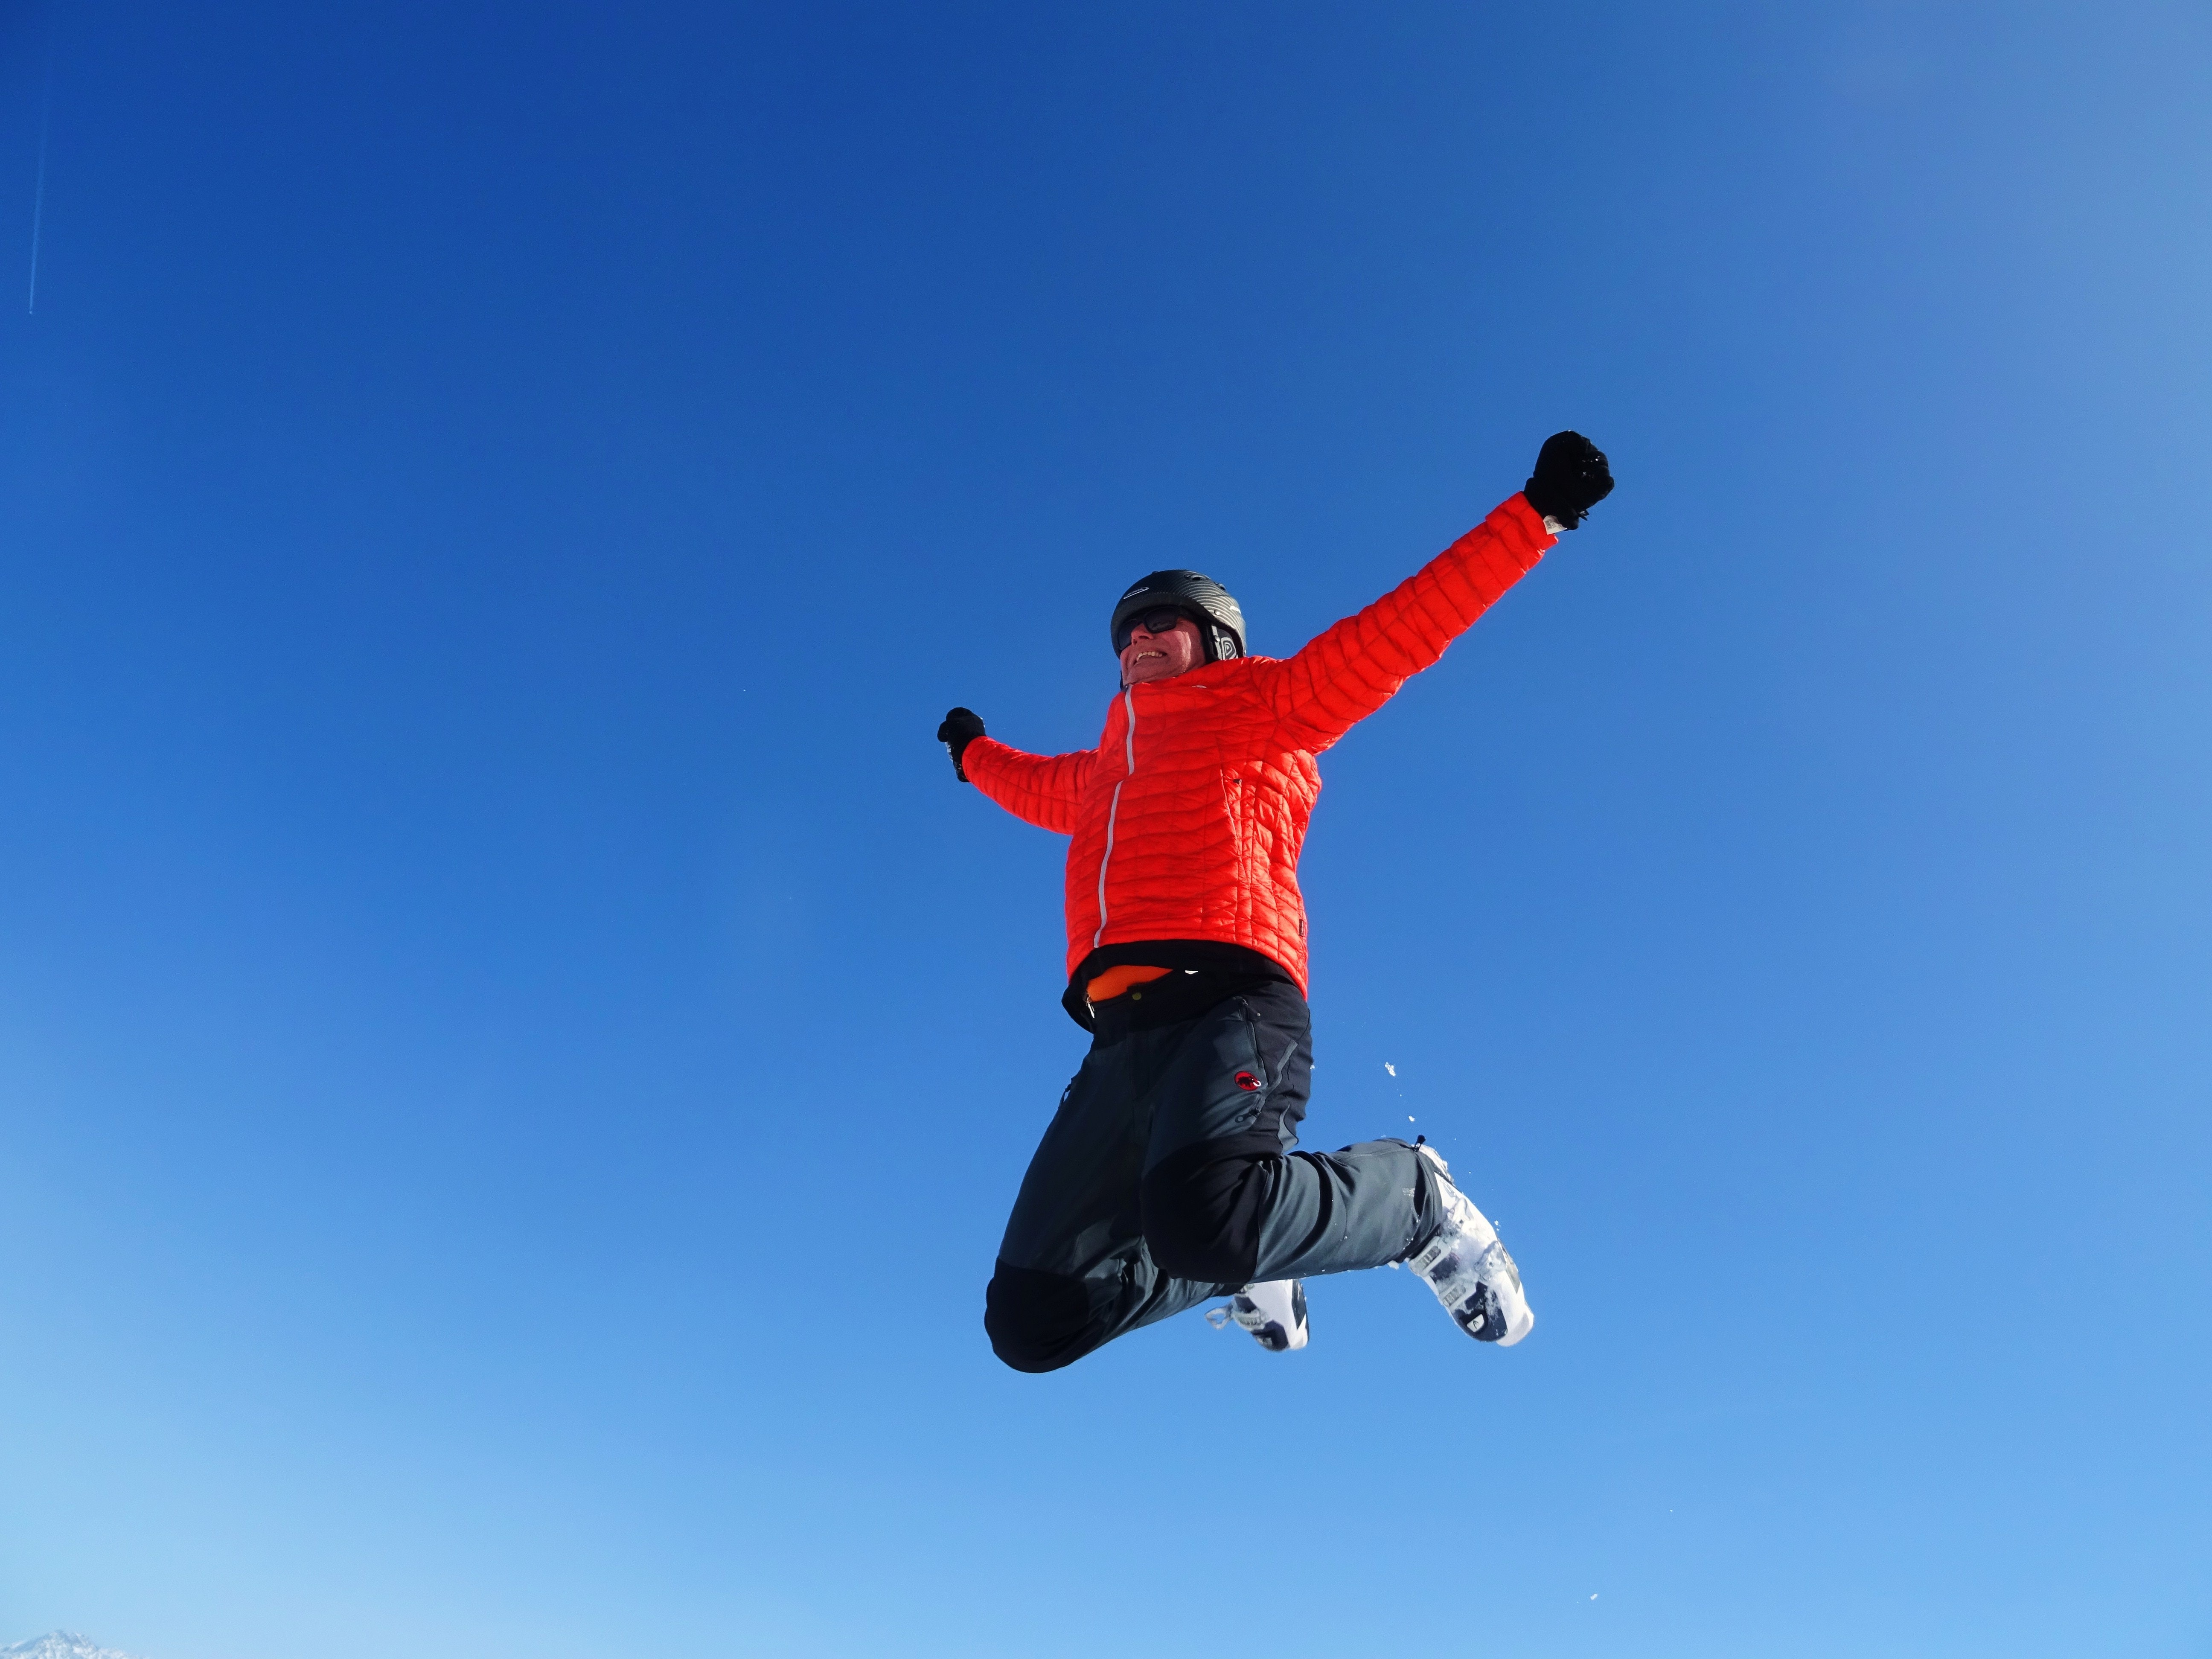 Man in Orange Zip Jacket and Black Pants Jumping Under Blue Sunny Sky, Action, Blue sky, Clear sky, Freedom, HQ Photo